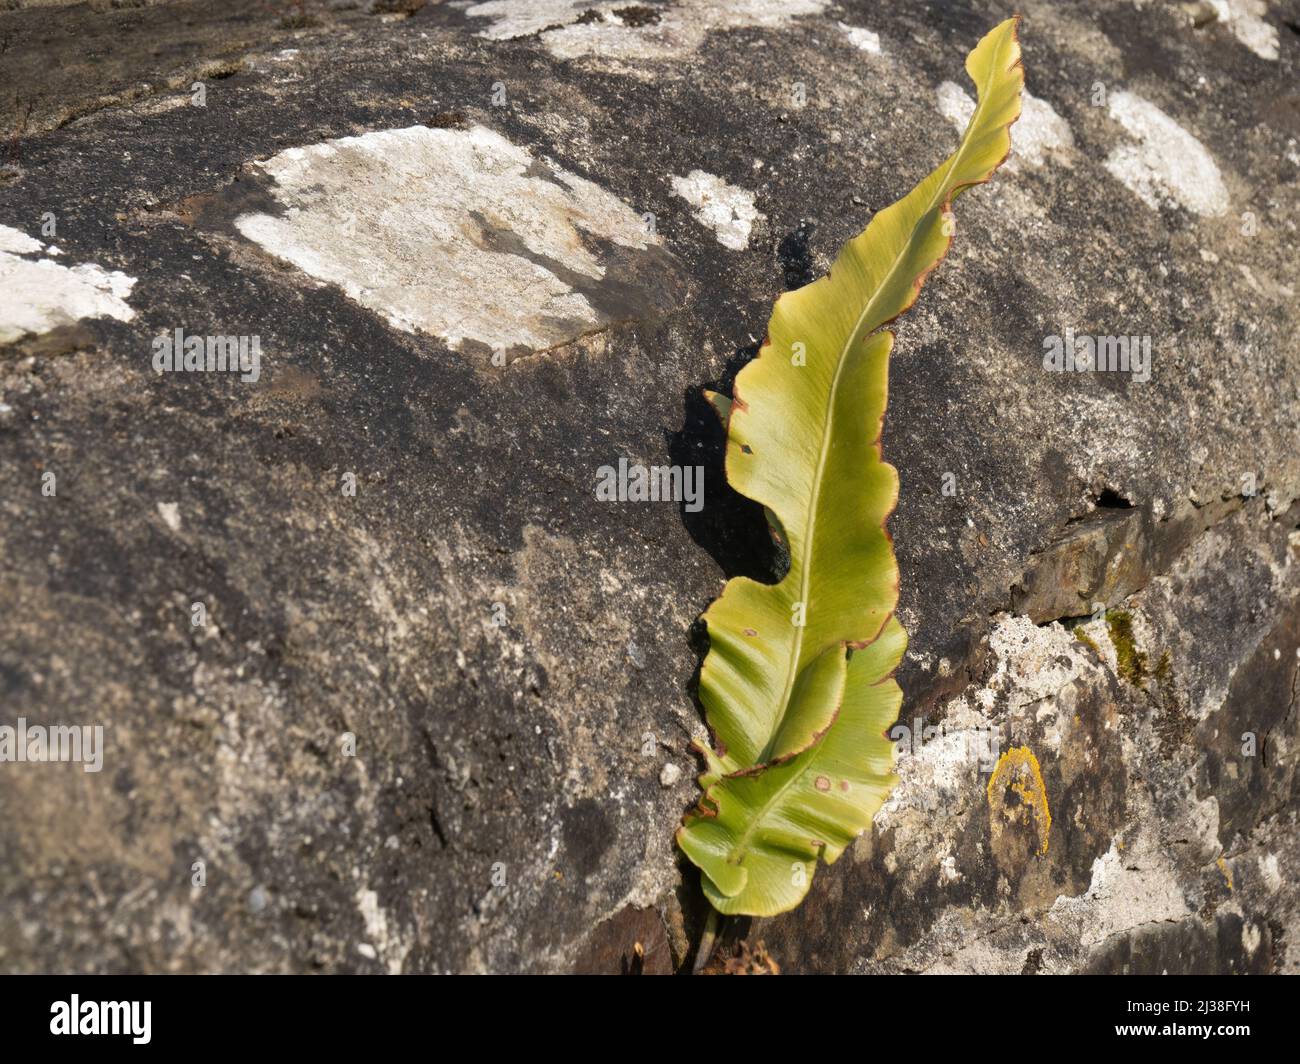 Hart's-tongue fern Asplenium scolopendrium struggling to survive growing on an old, stone wall. Survival concept, Stock Photo